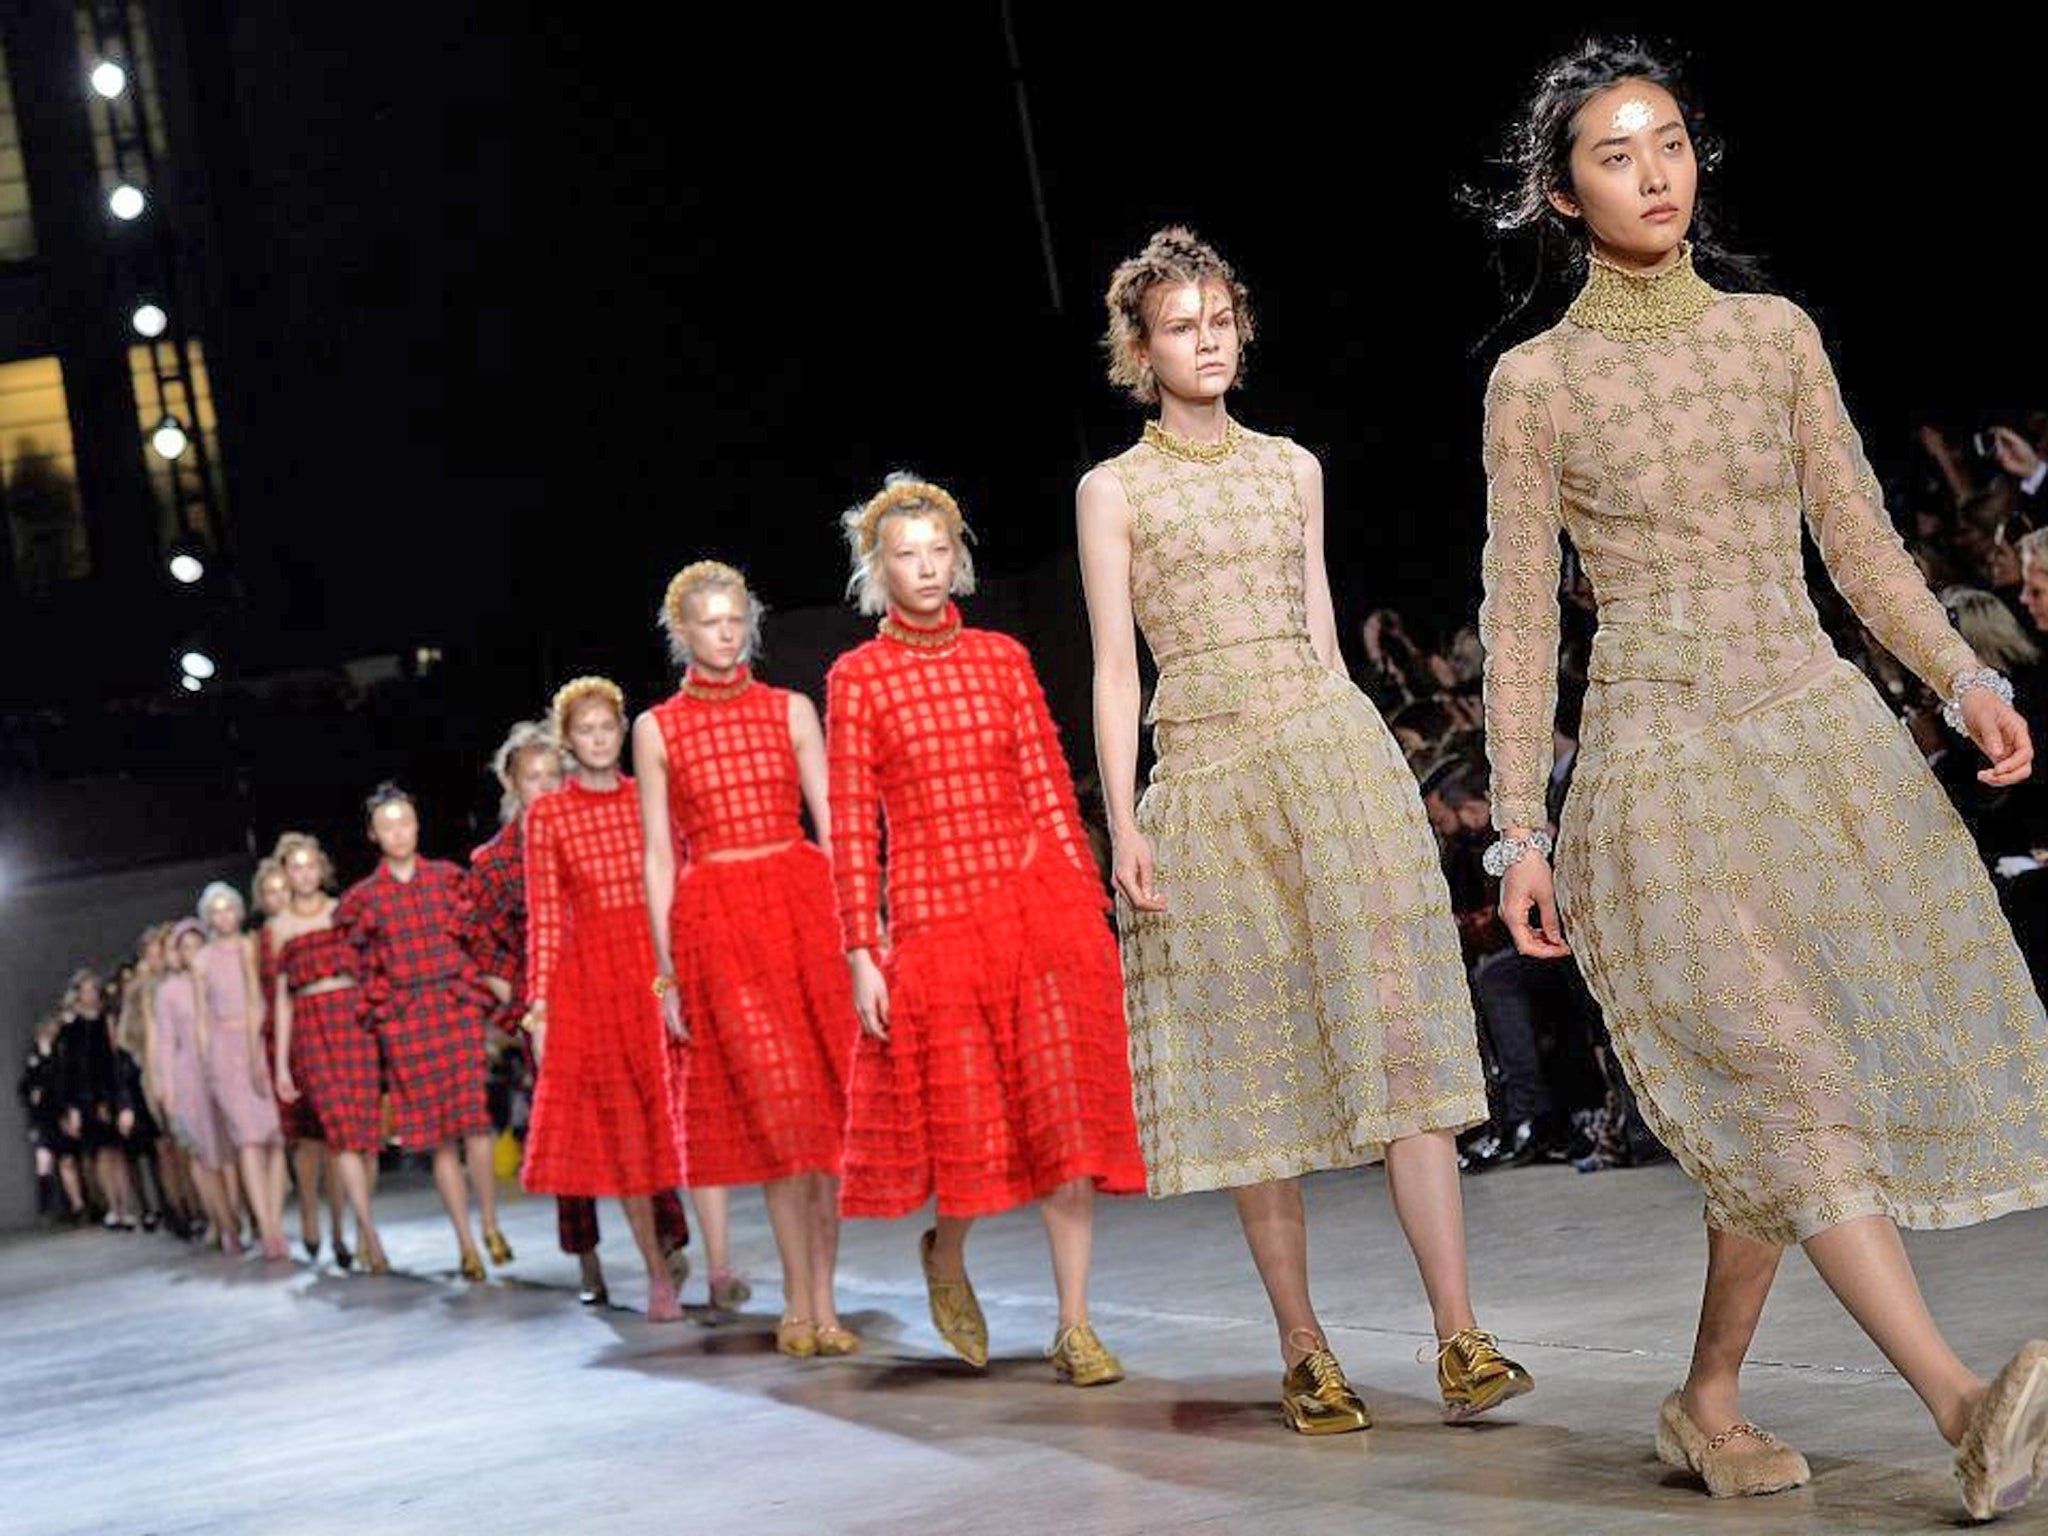 Models present creations from designer Simone Rocha during the 2014 Autumn / Winter London Fashion Week